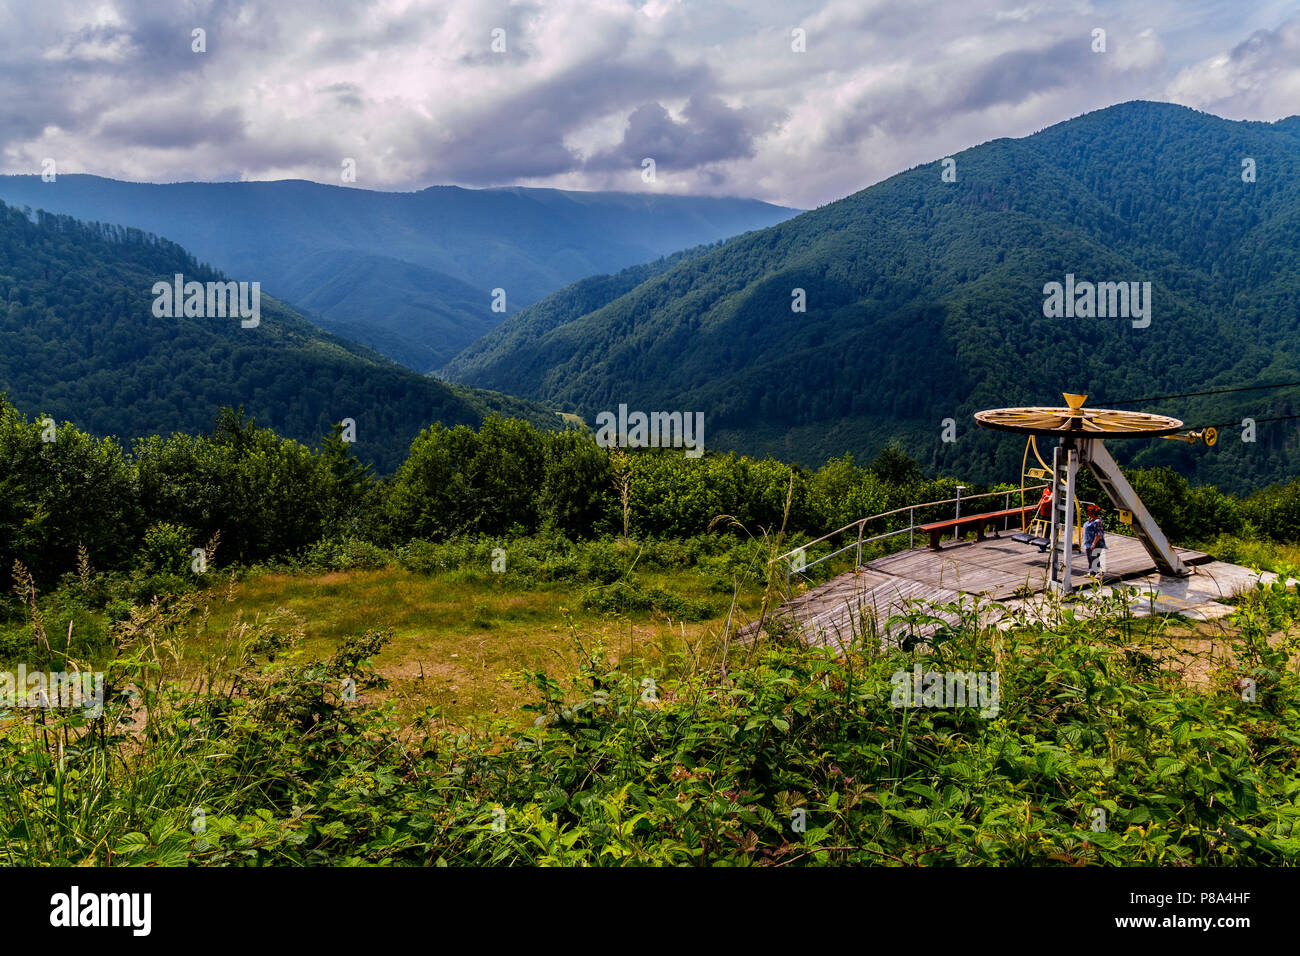 Platform with a lift wheel with people standing on it. With a beautiful view of the mountain slopes covered with green trees going into the distance.  Stock Photo